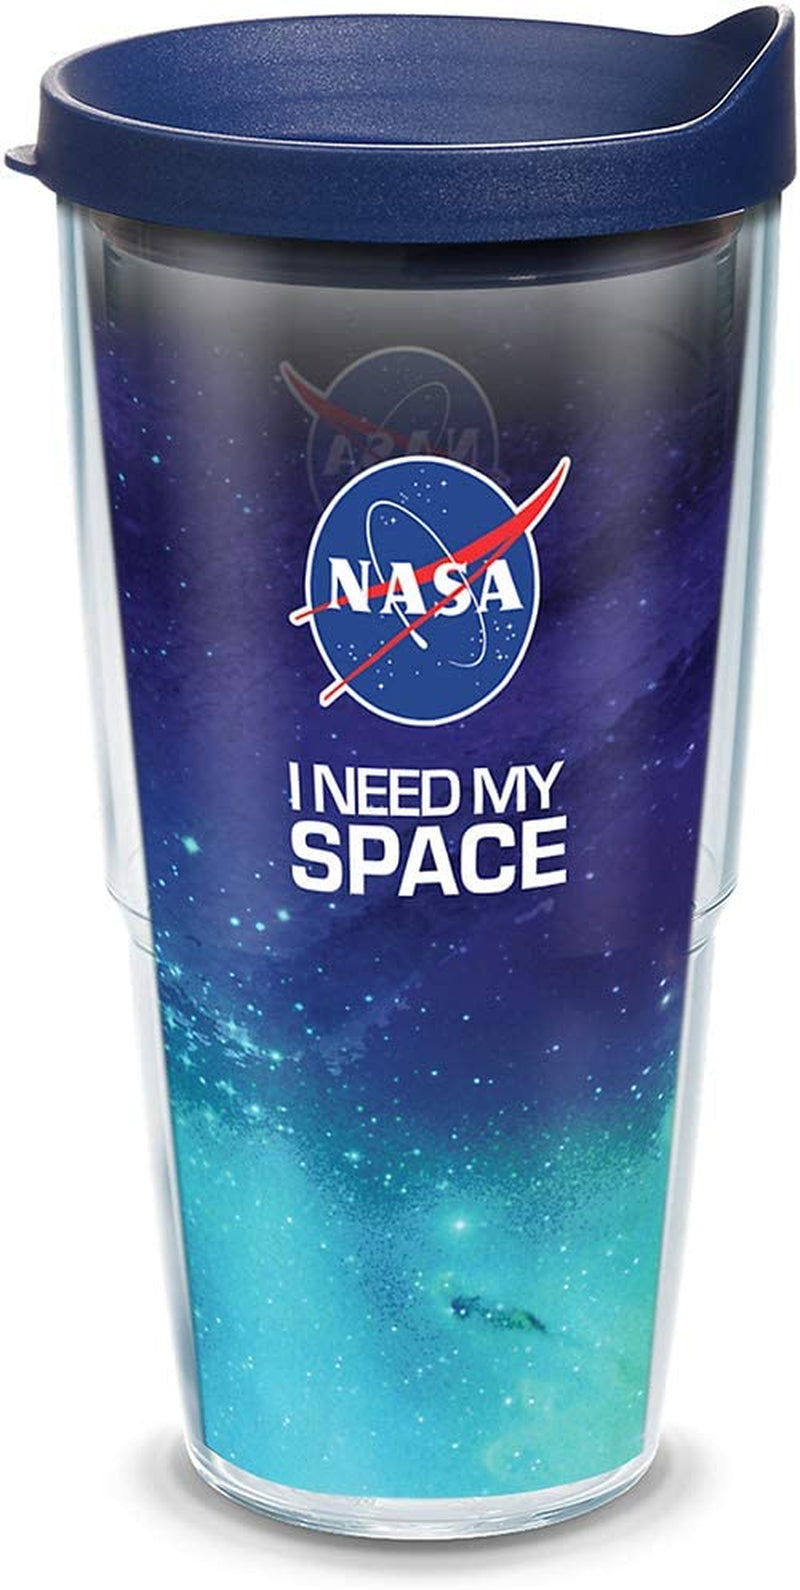 Tervis Made in USA Double Walled NASA Insulated Tumbler Cup Keeps Drinks Cold & Hot, 24Oz, I Need My Space Home & Garden > Kitchen & Dining > Tableware > Drinkware Tervis   